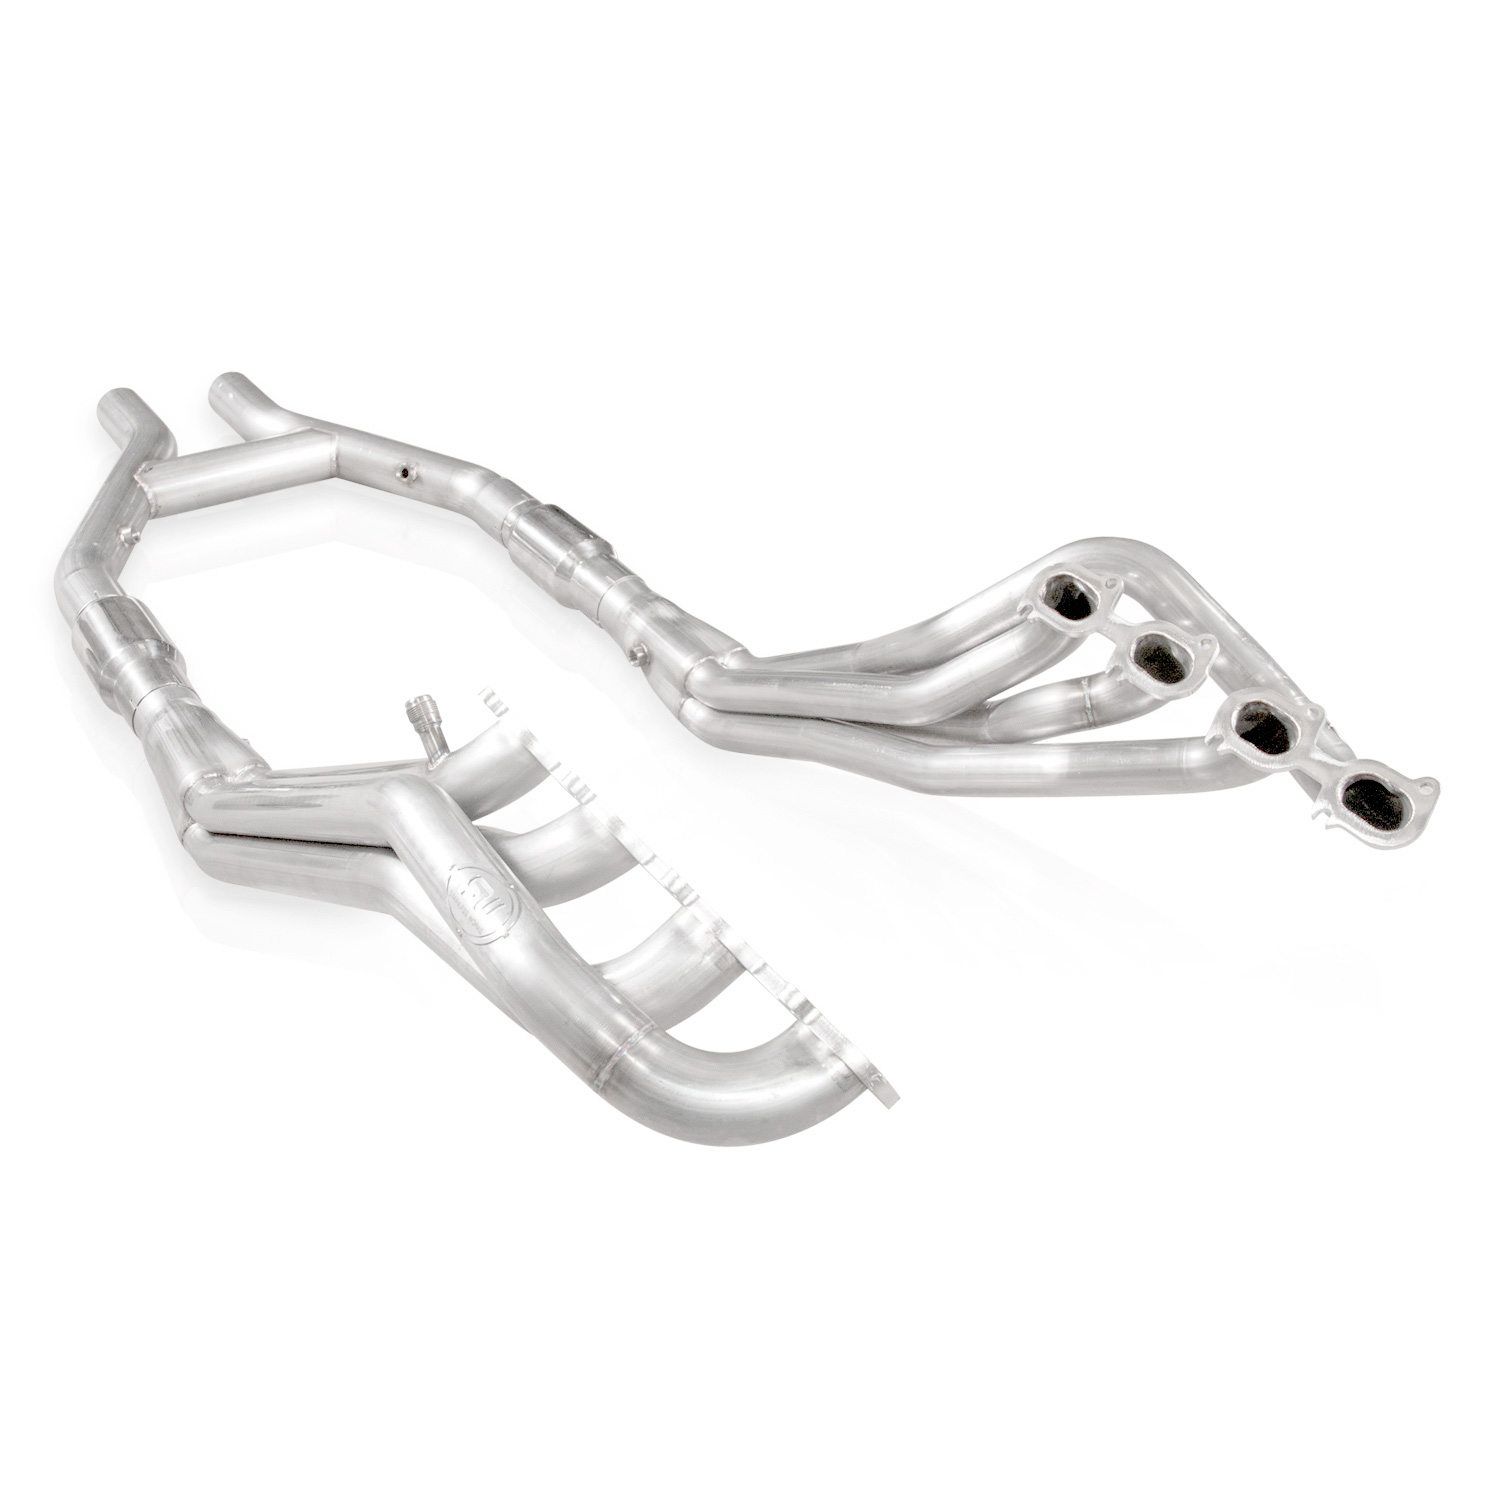 2007-2014 Mustang Shelby GT500 5.4L, 5.8L SW Headers 1-7/8" With Catted Leads Factory & Performance Connect